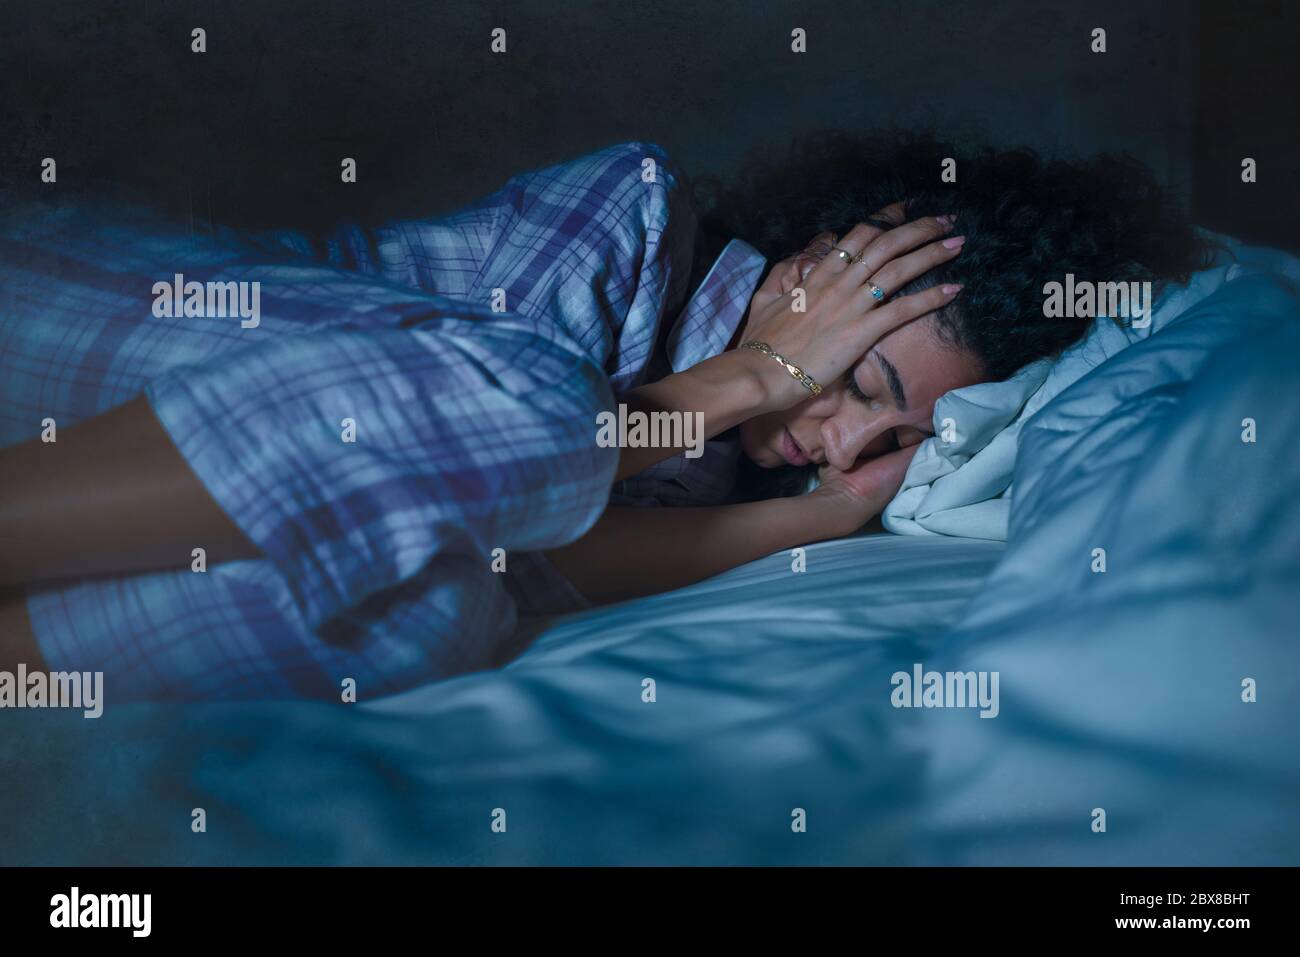 dramatic night lifestyle portrait of young sad and depressed middle eastern woman with curly hair sleepless in bed awake and thoughtful feeling worrie Stock Photo